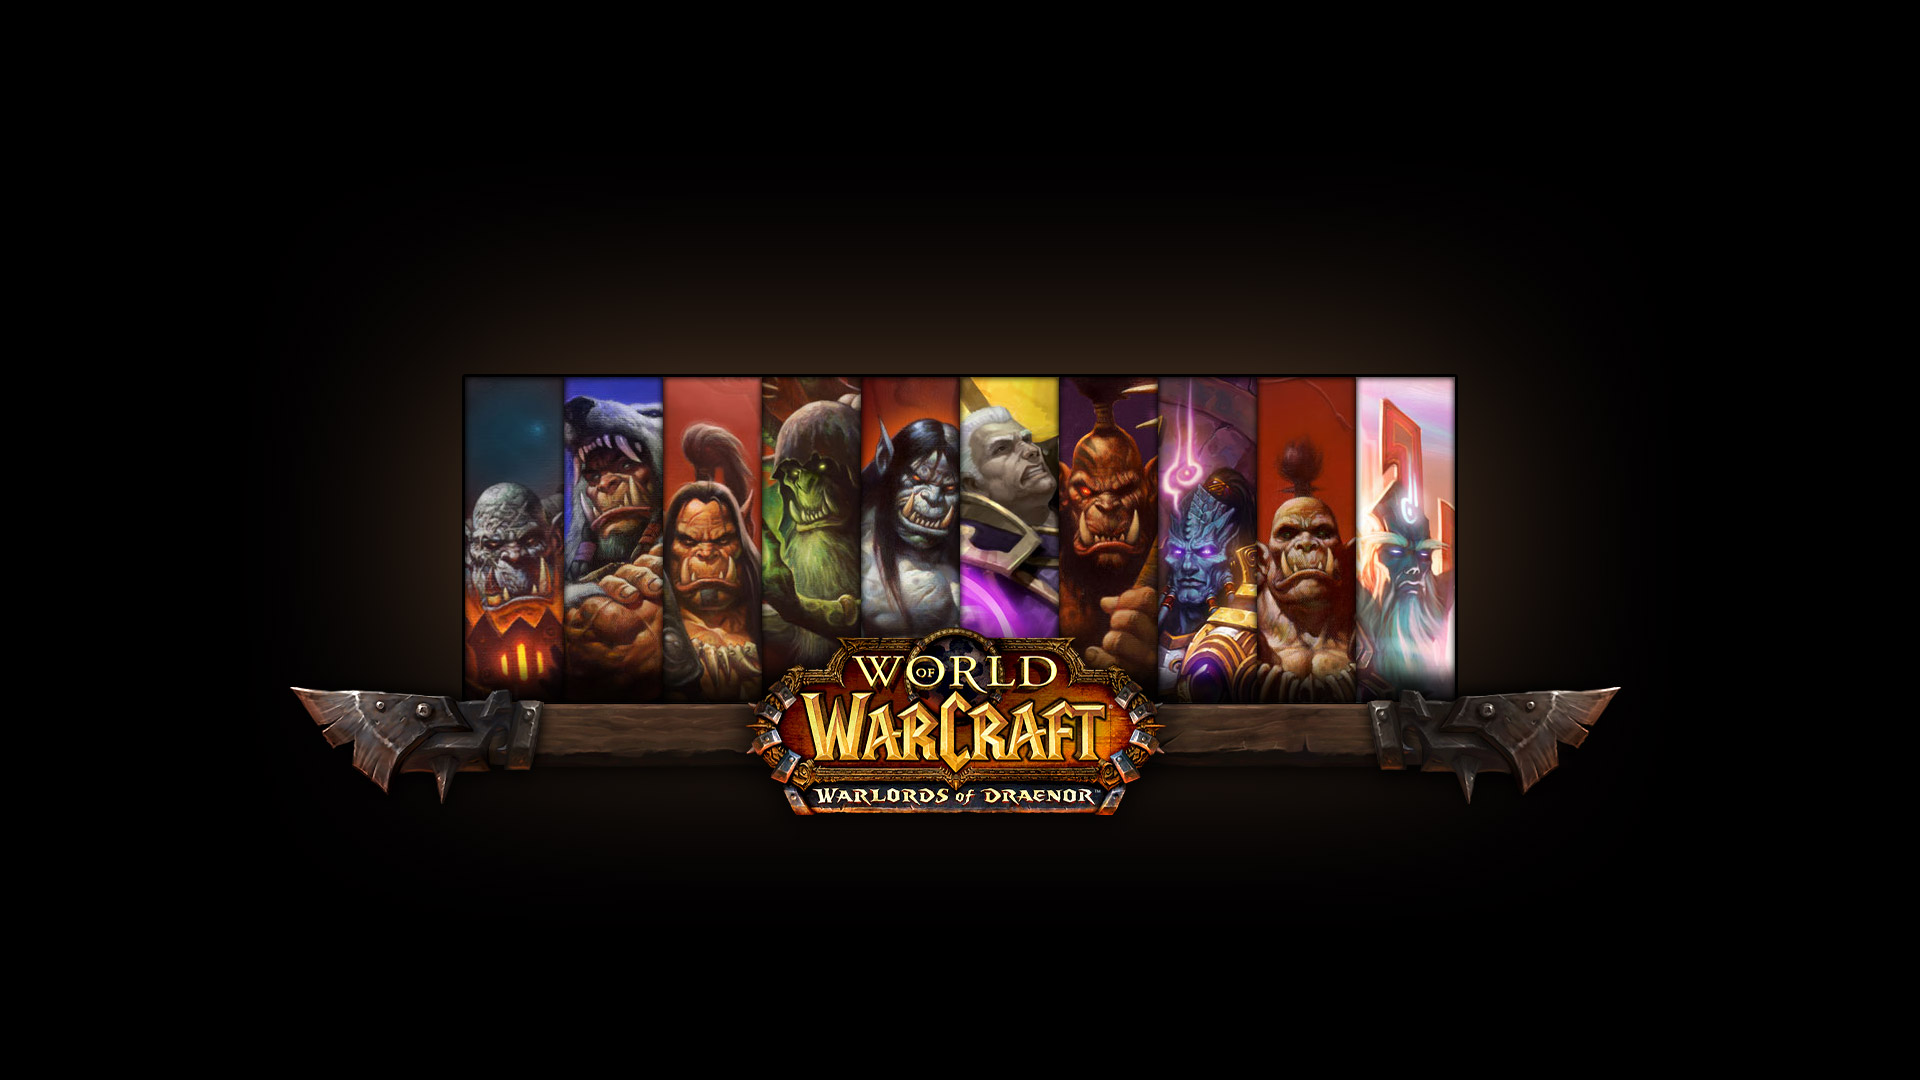 Video Game World of Warcraft: Warlords of Draenor HD Wallpaper